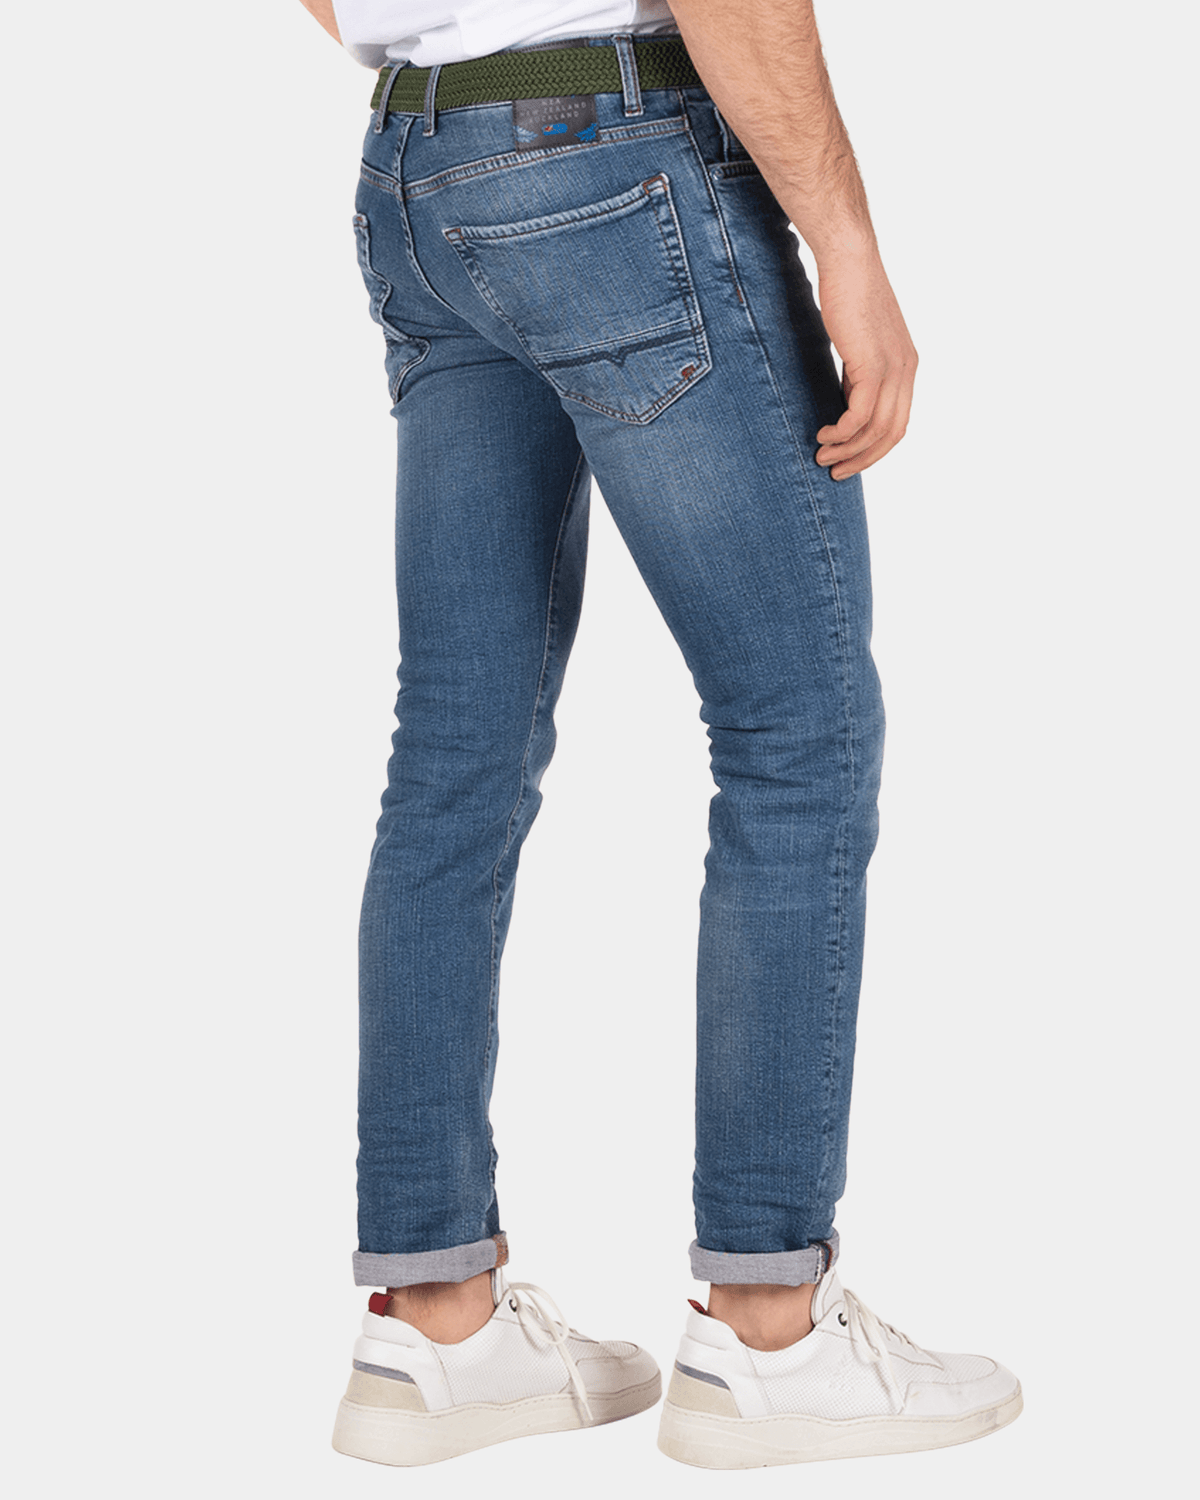 Nelson Jeans - Light Stone | NZA New Zealand Auckland